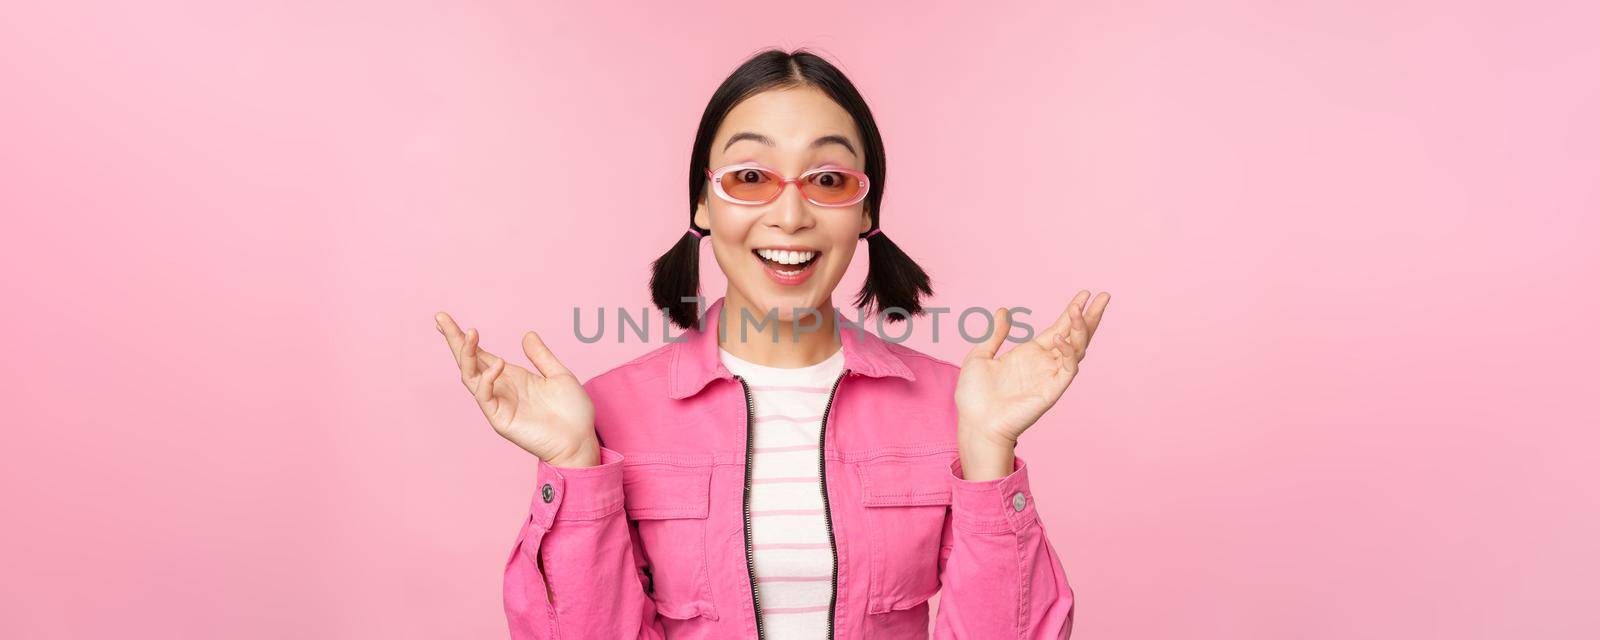 Image of asian girl looking surprised and excited, smiling, amazed reaction to big news, standing over pink background.